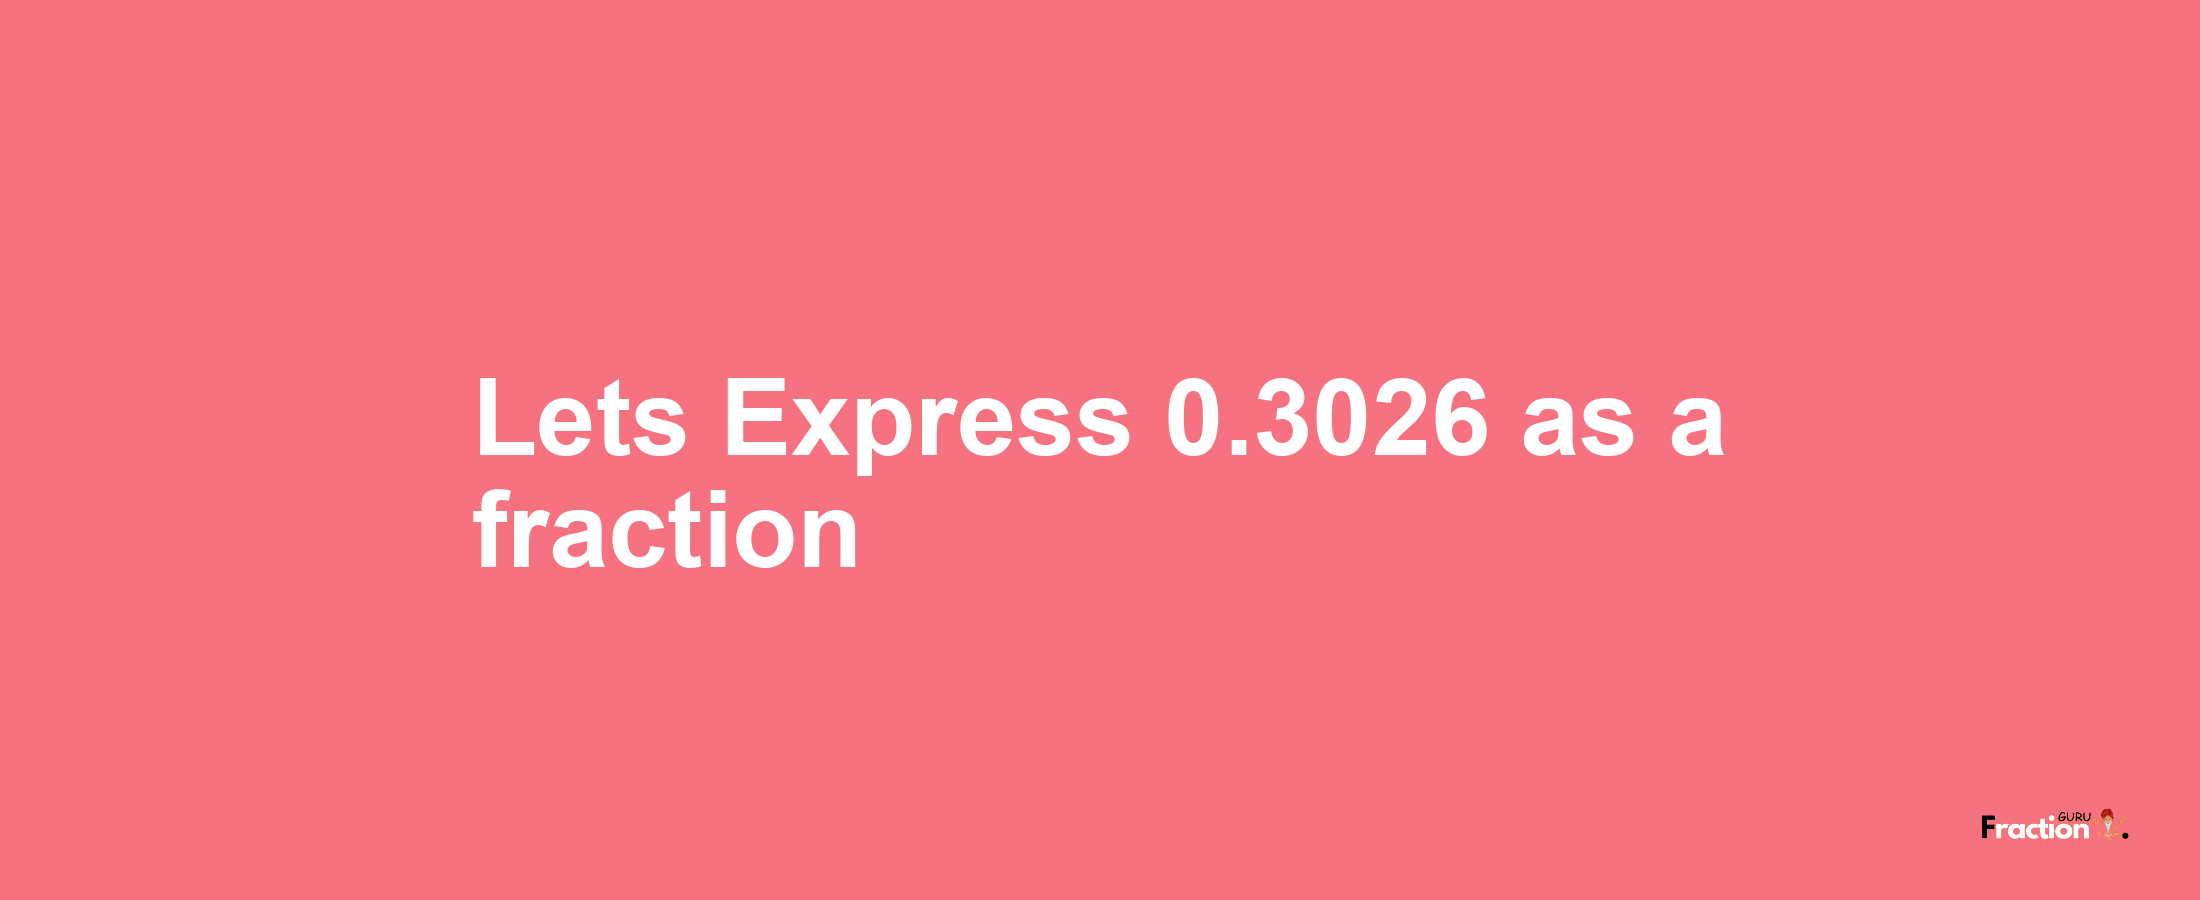 Lets Express 0.3026 as afraction